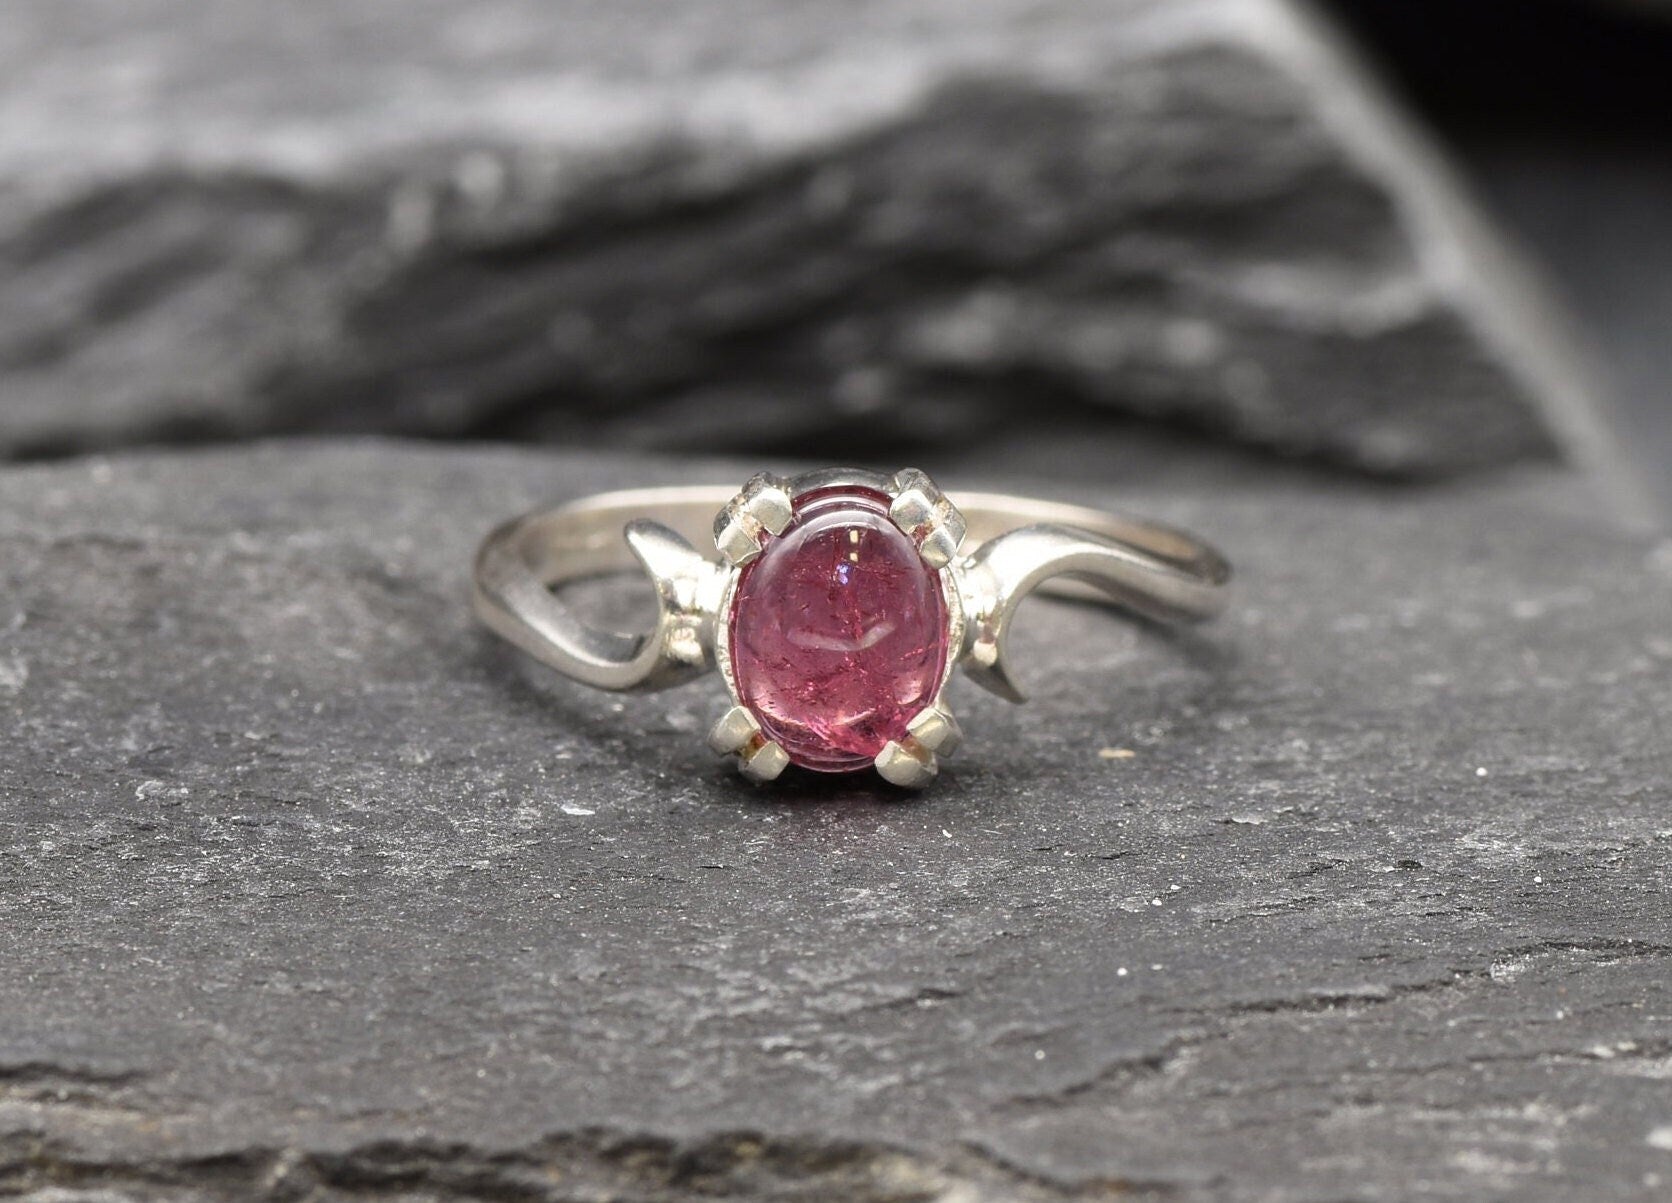 Pink Tourmaline Ring, Antique Style Ring, Dainty Pink Ring, Vintage Ring, October Birthstone, Bohemian Ring, Solid Silver Ring, Art Noveau